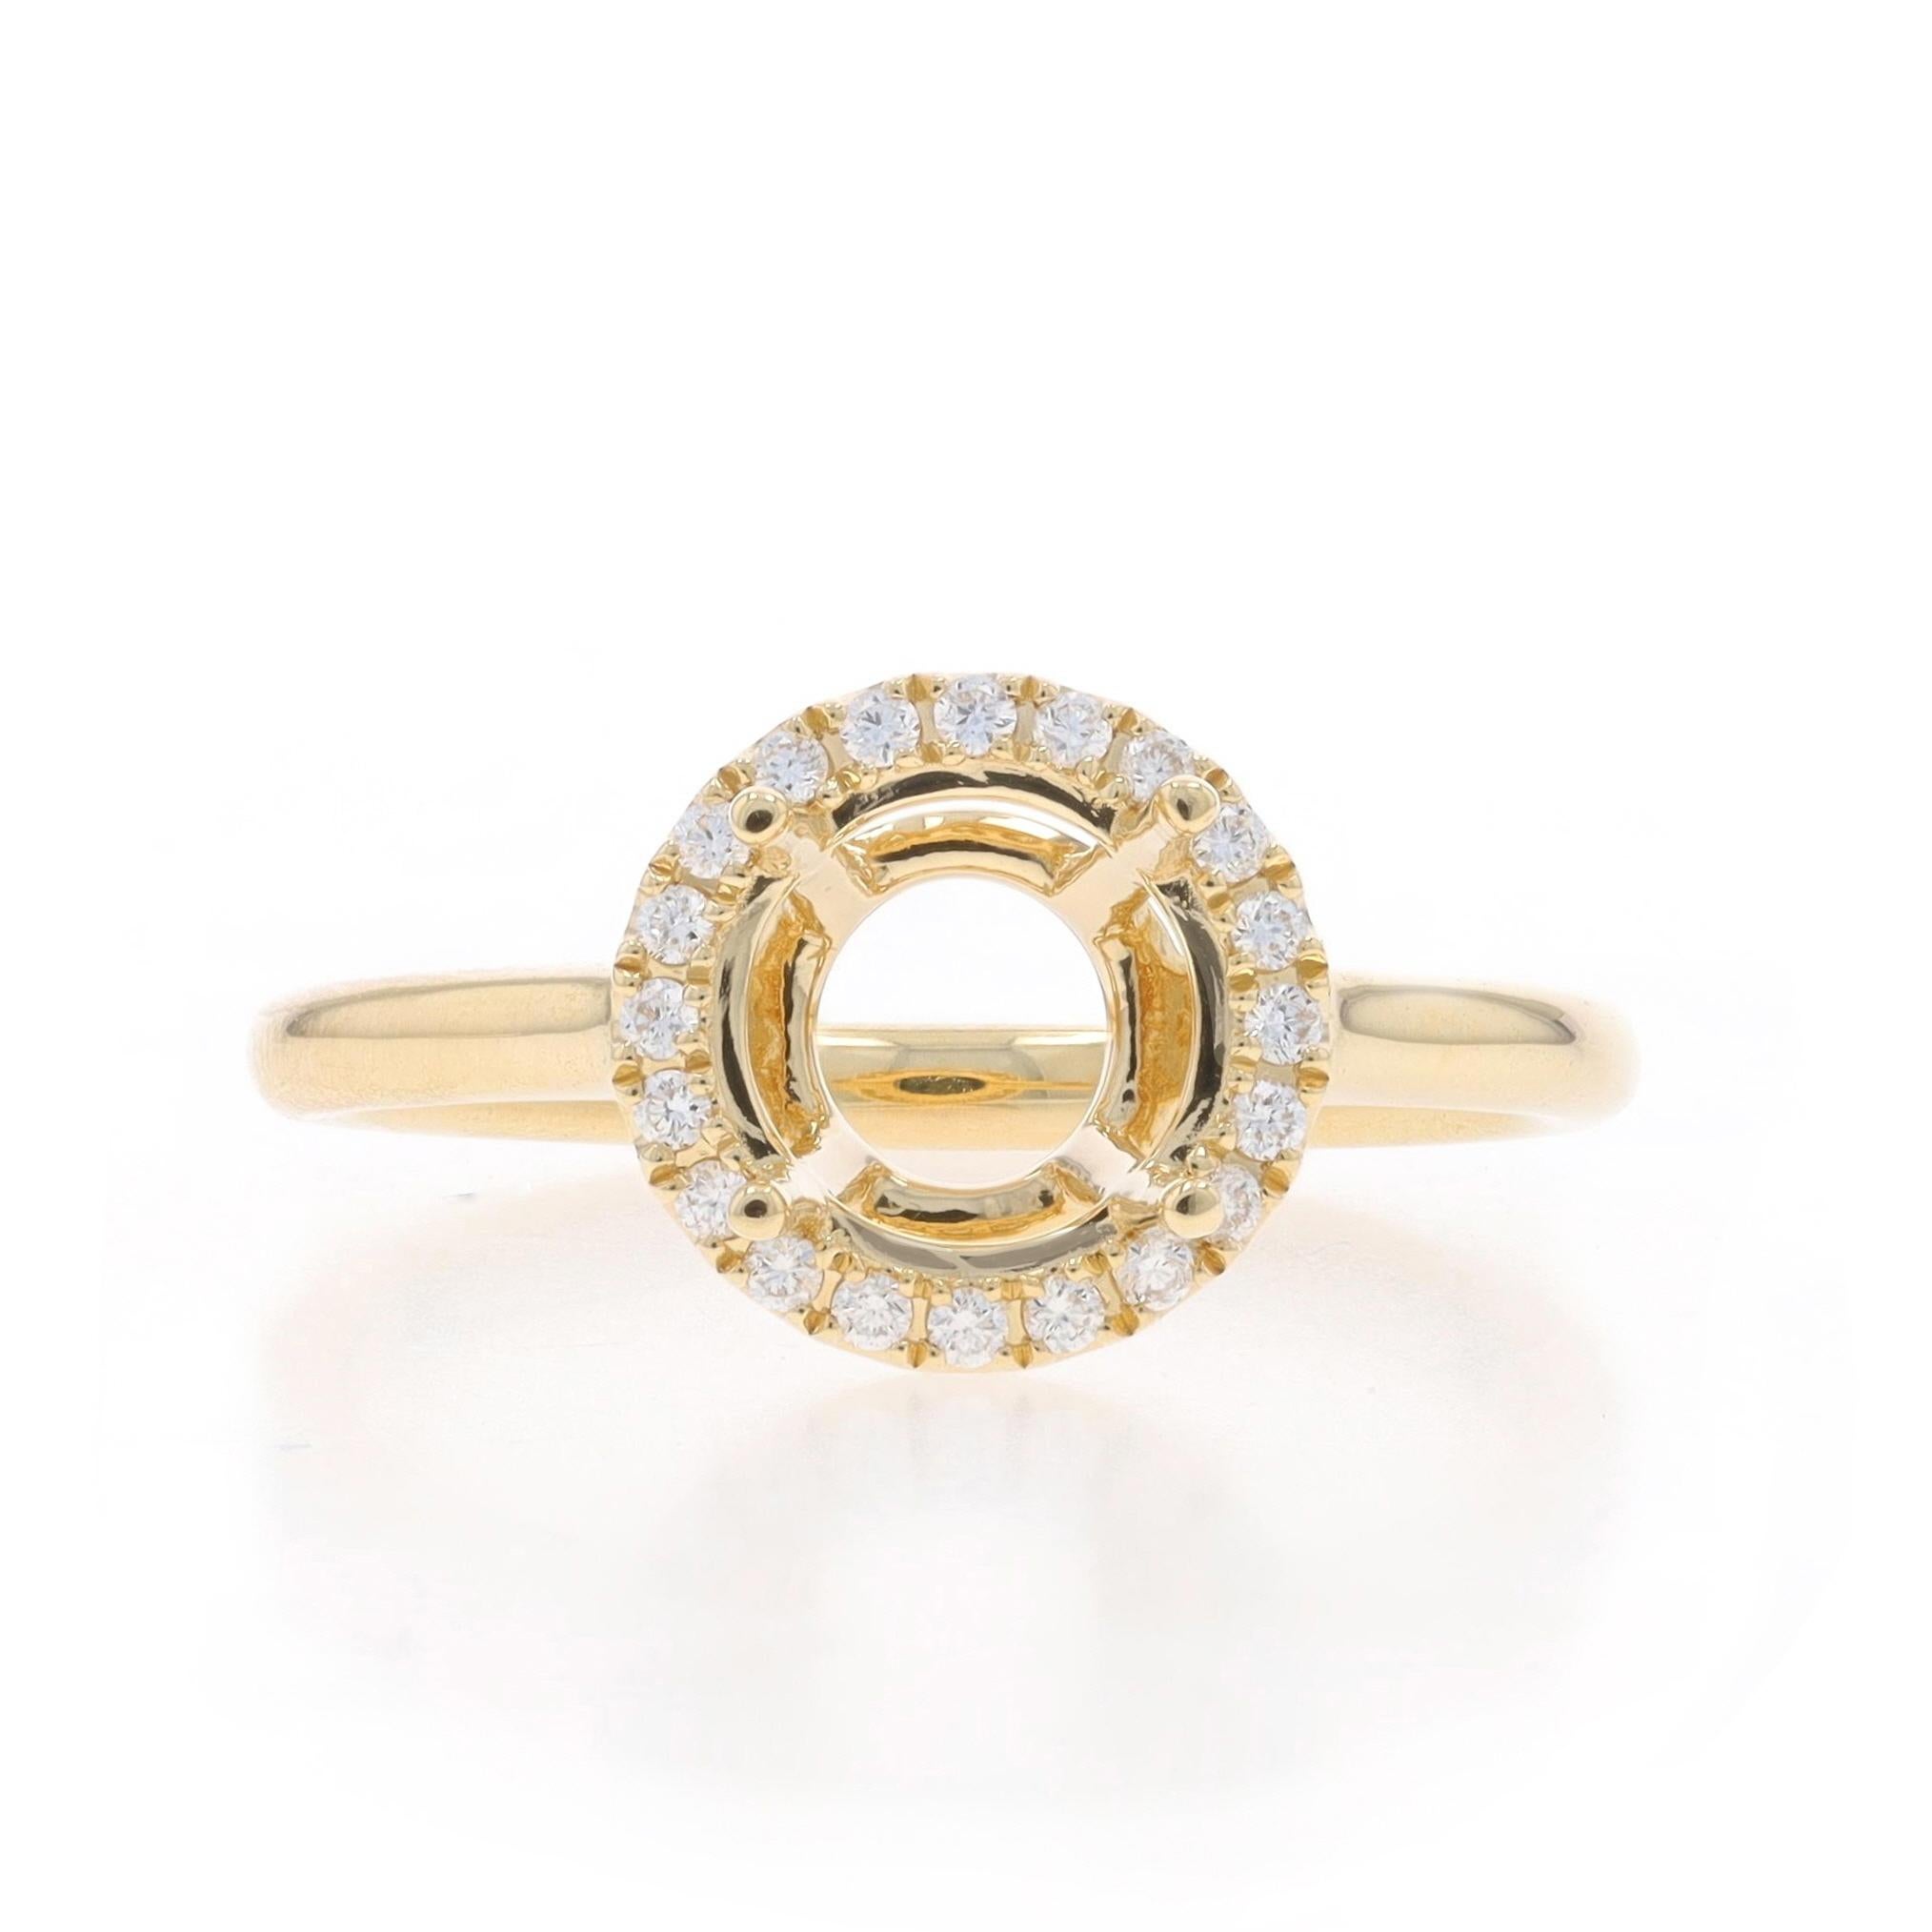 Size: 6 1/2
Sizing Fee: Up 3 sizes for $35 or Down 2 sizes for $35

Metal Content: 14k Yellow Gold

Stone Information
Natural Diamonds
Carat(s): .12ctw
Cut: Round Brilliant
Color: G
Clarity: VS2 - SI1

Total Carats: .12ctw

Center Fits Stone